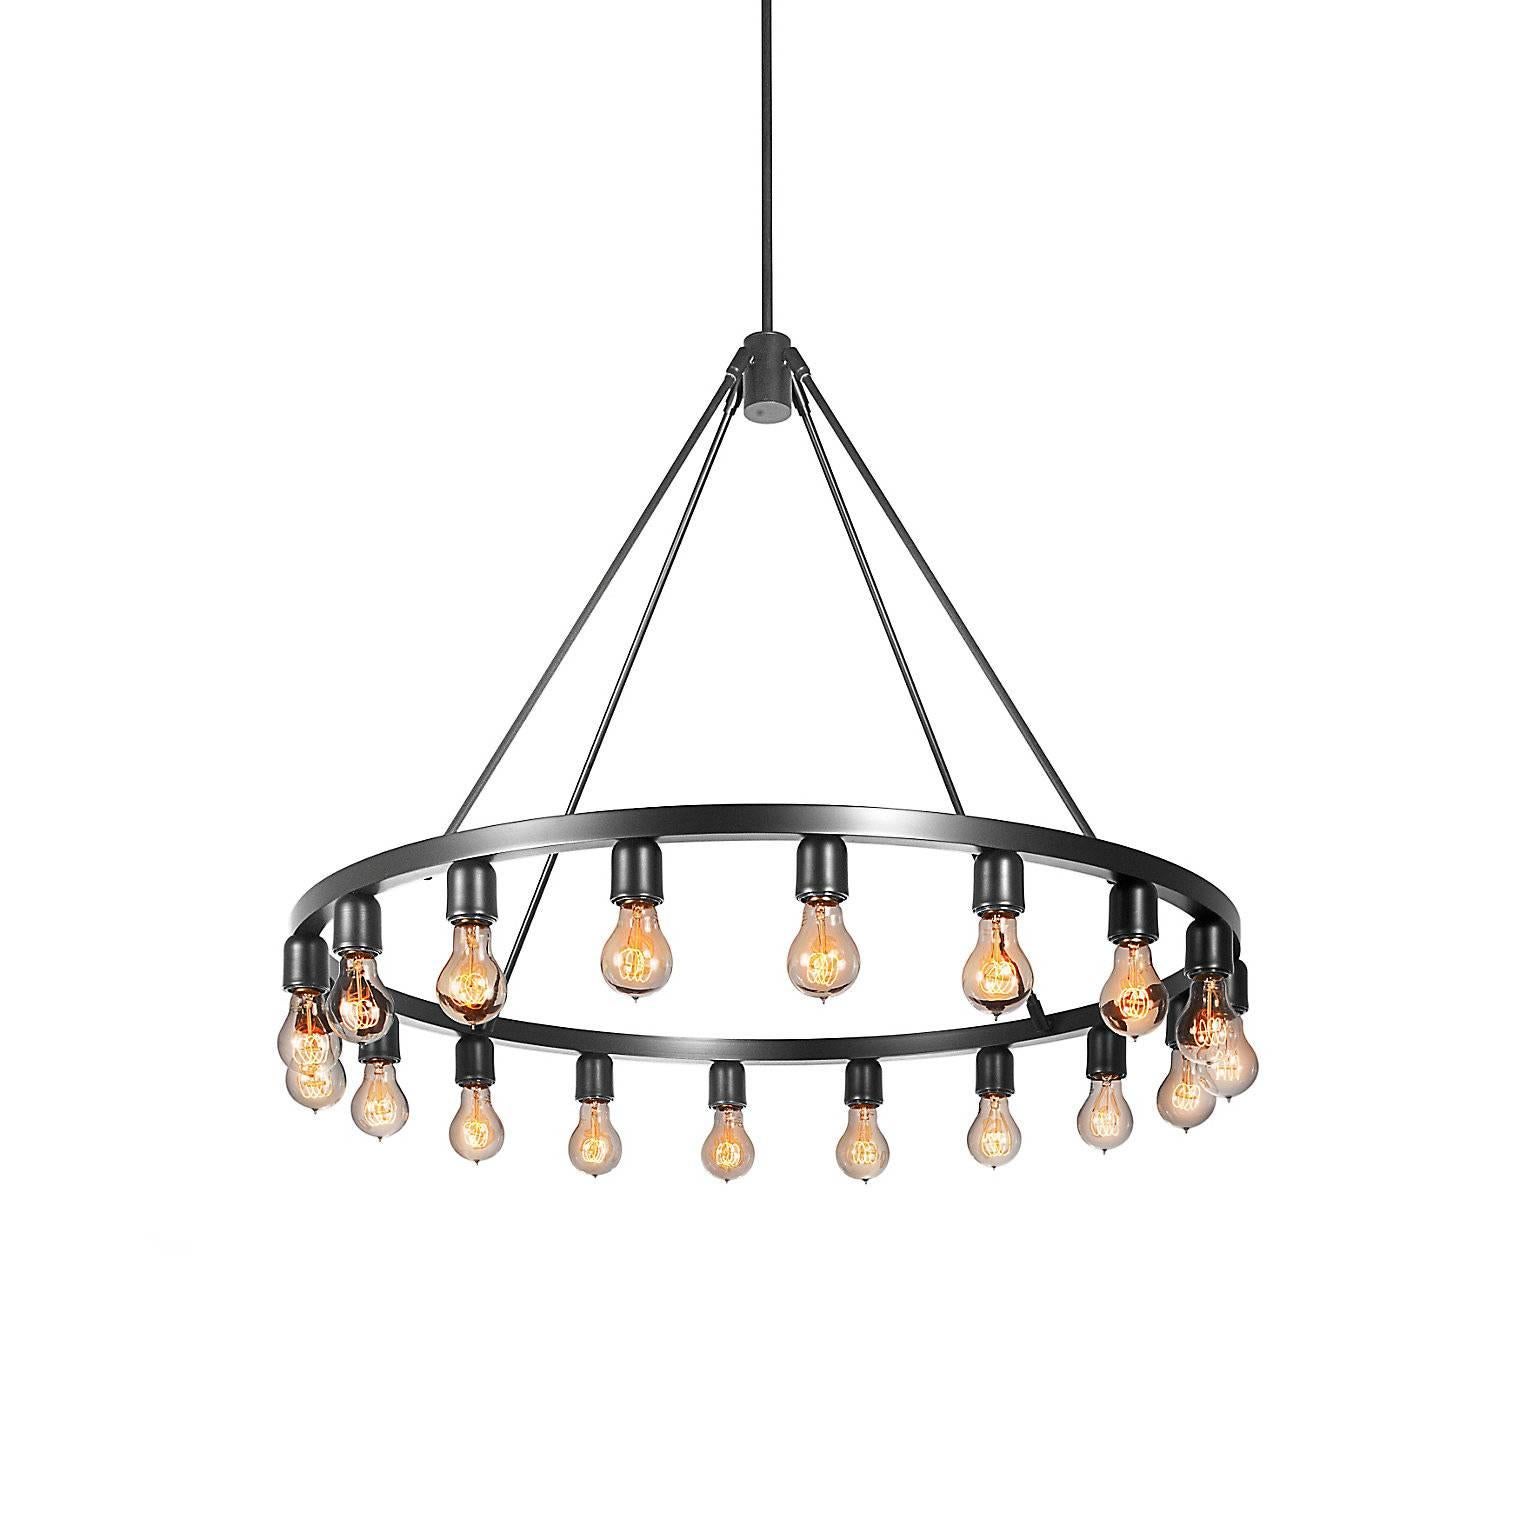 The Spark Chandelier celebrates minimal design, emphasizing the elegance of exposed bulbs. This chic-meets-industrial fixture creates welcome intrigue in any setting with its assortment of vintage-style lamping options, which can be oriented in